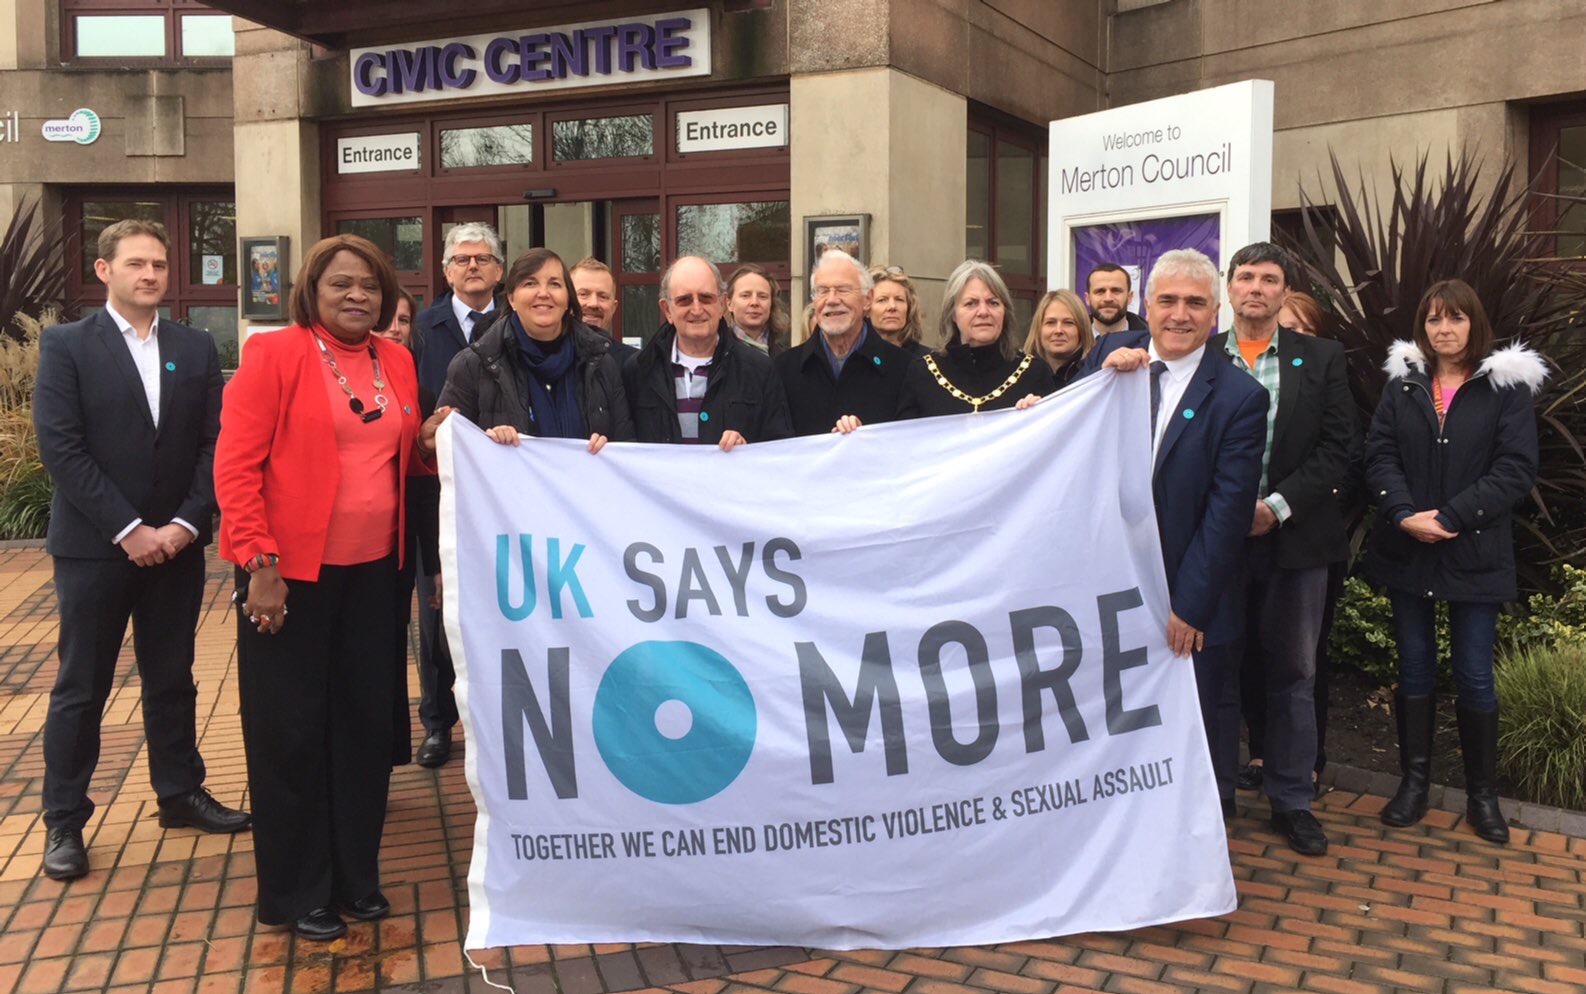 Gallery entries Archive - UK SAYS NO MORE